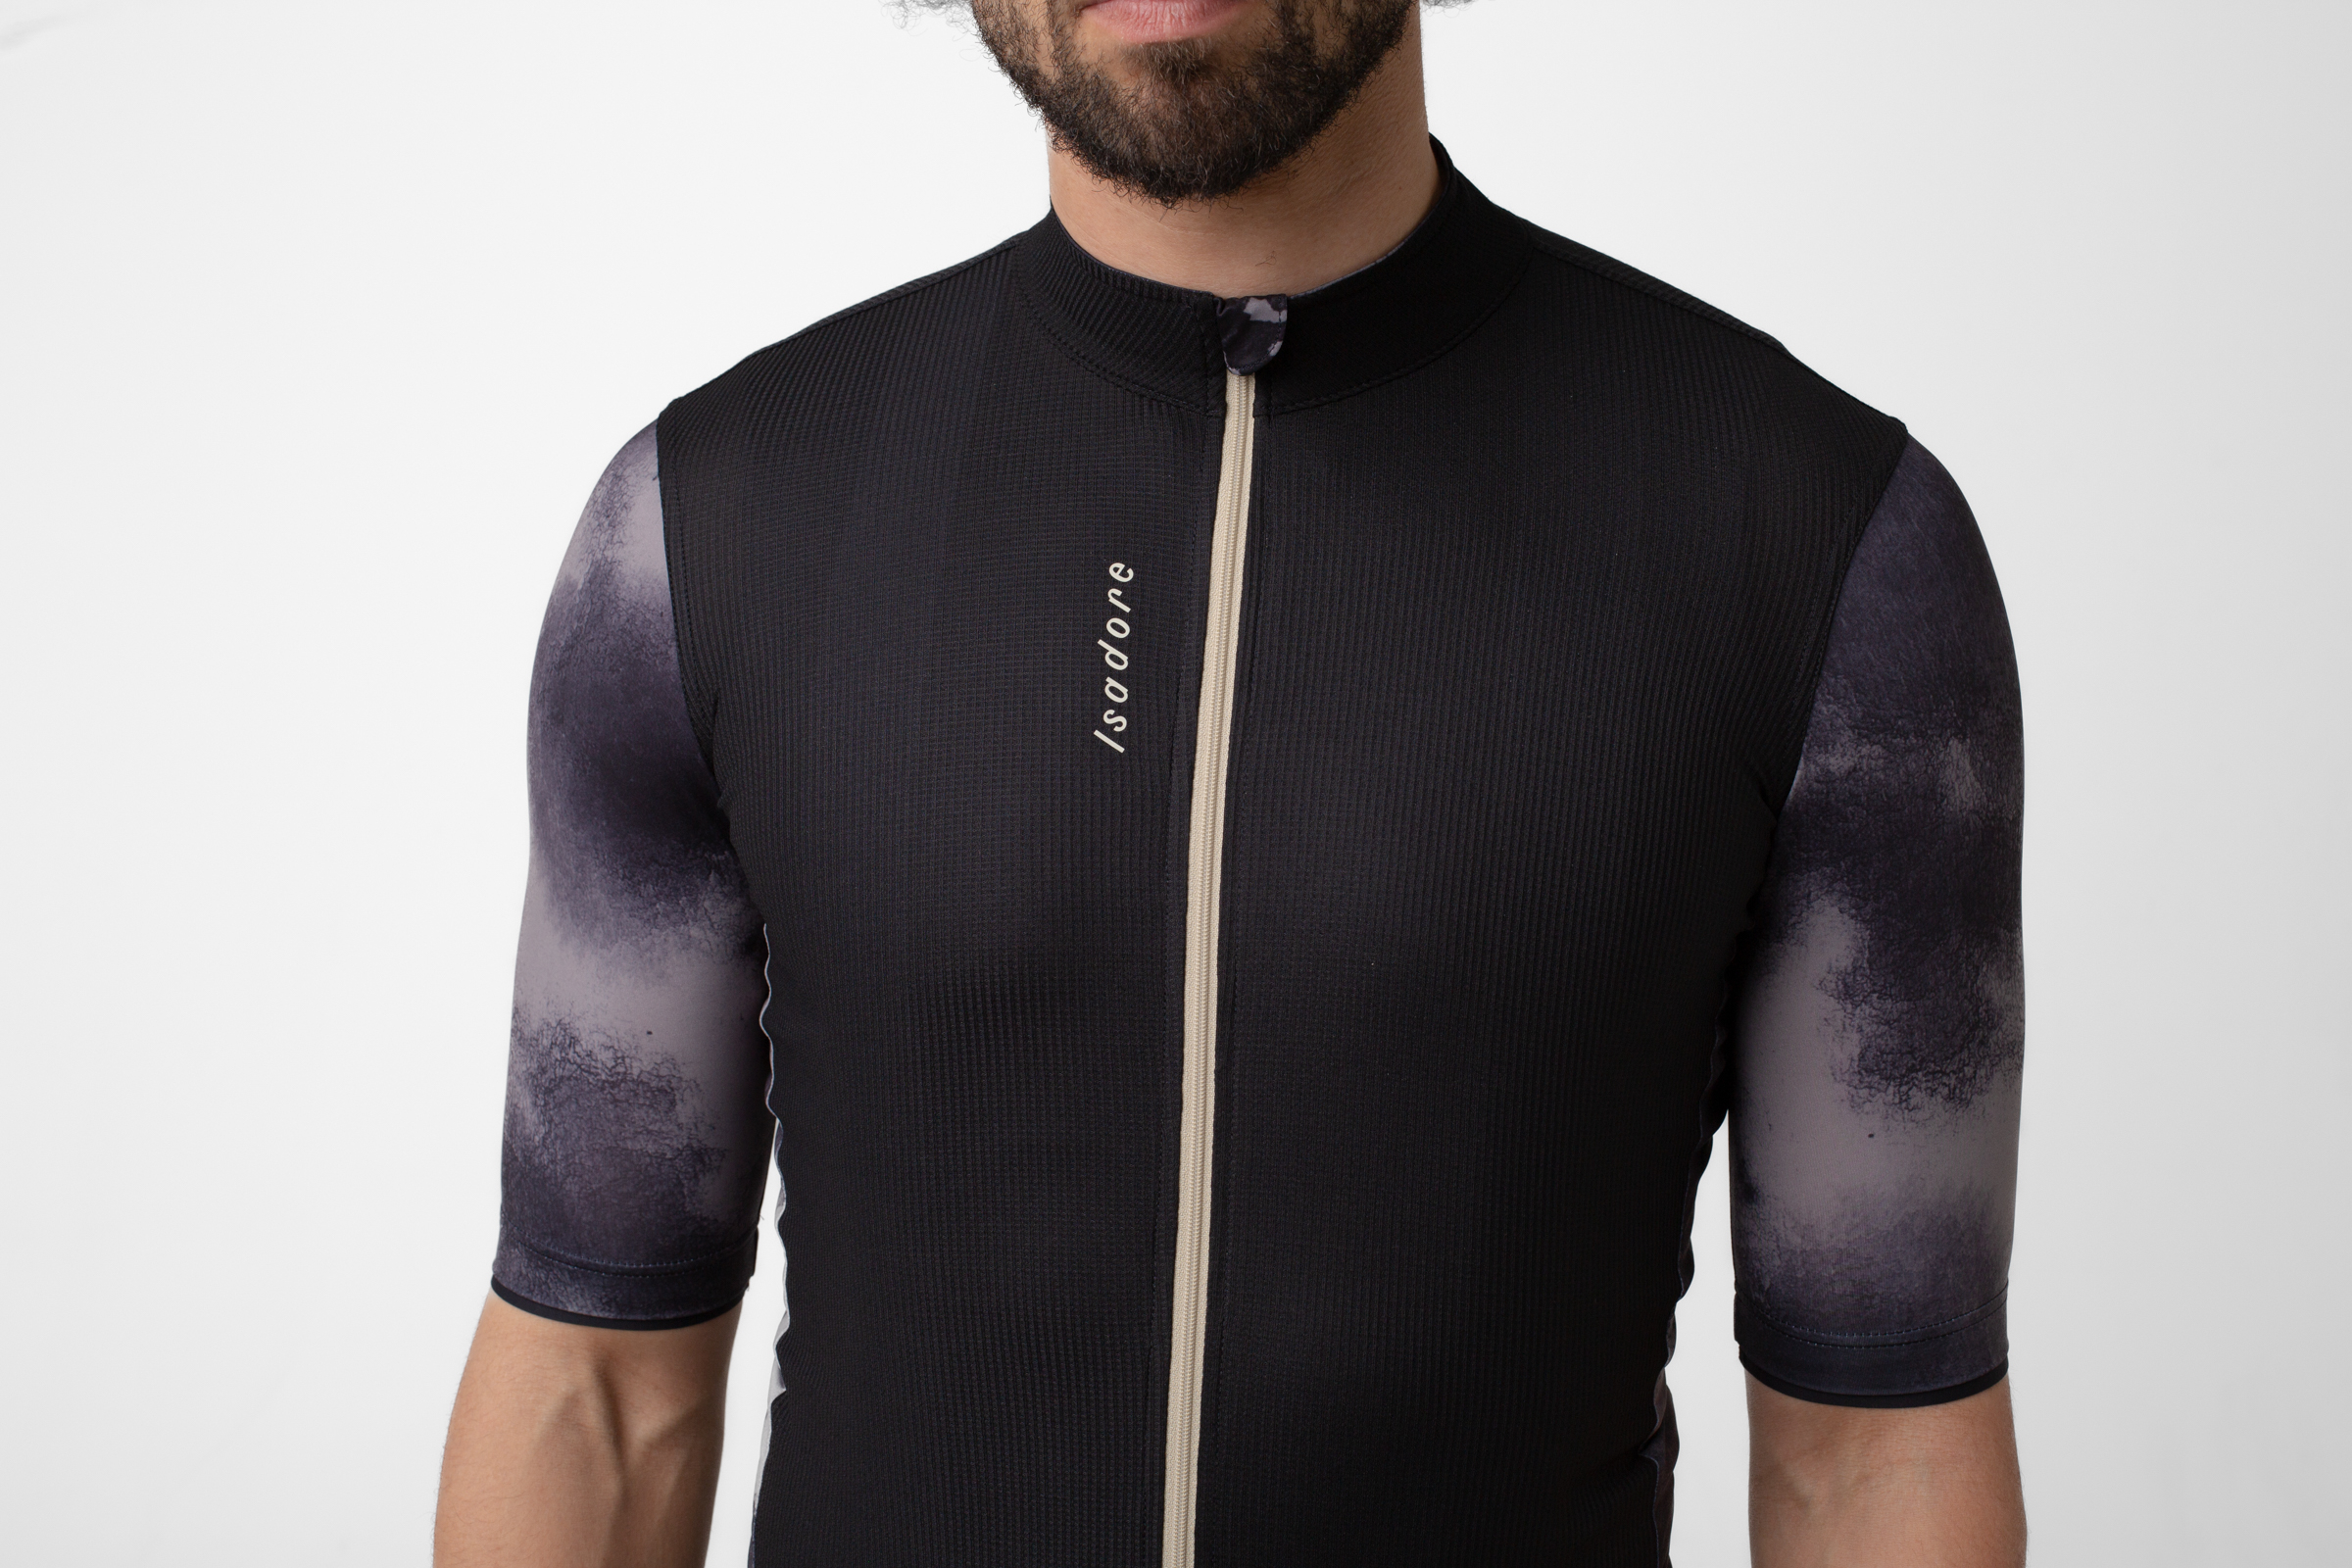 Signature Climber's Jersey Anthracite / Oyster gray